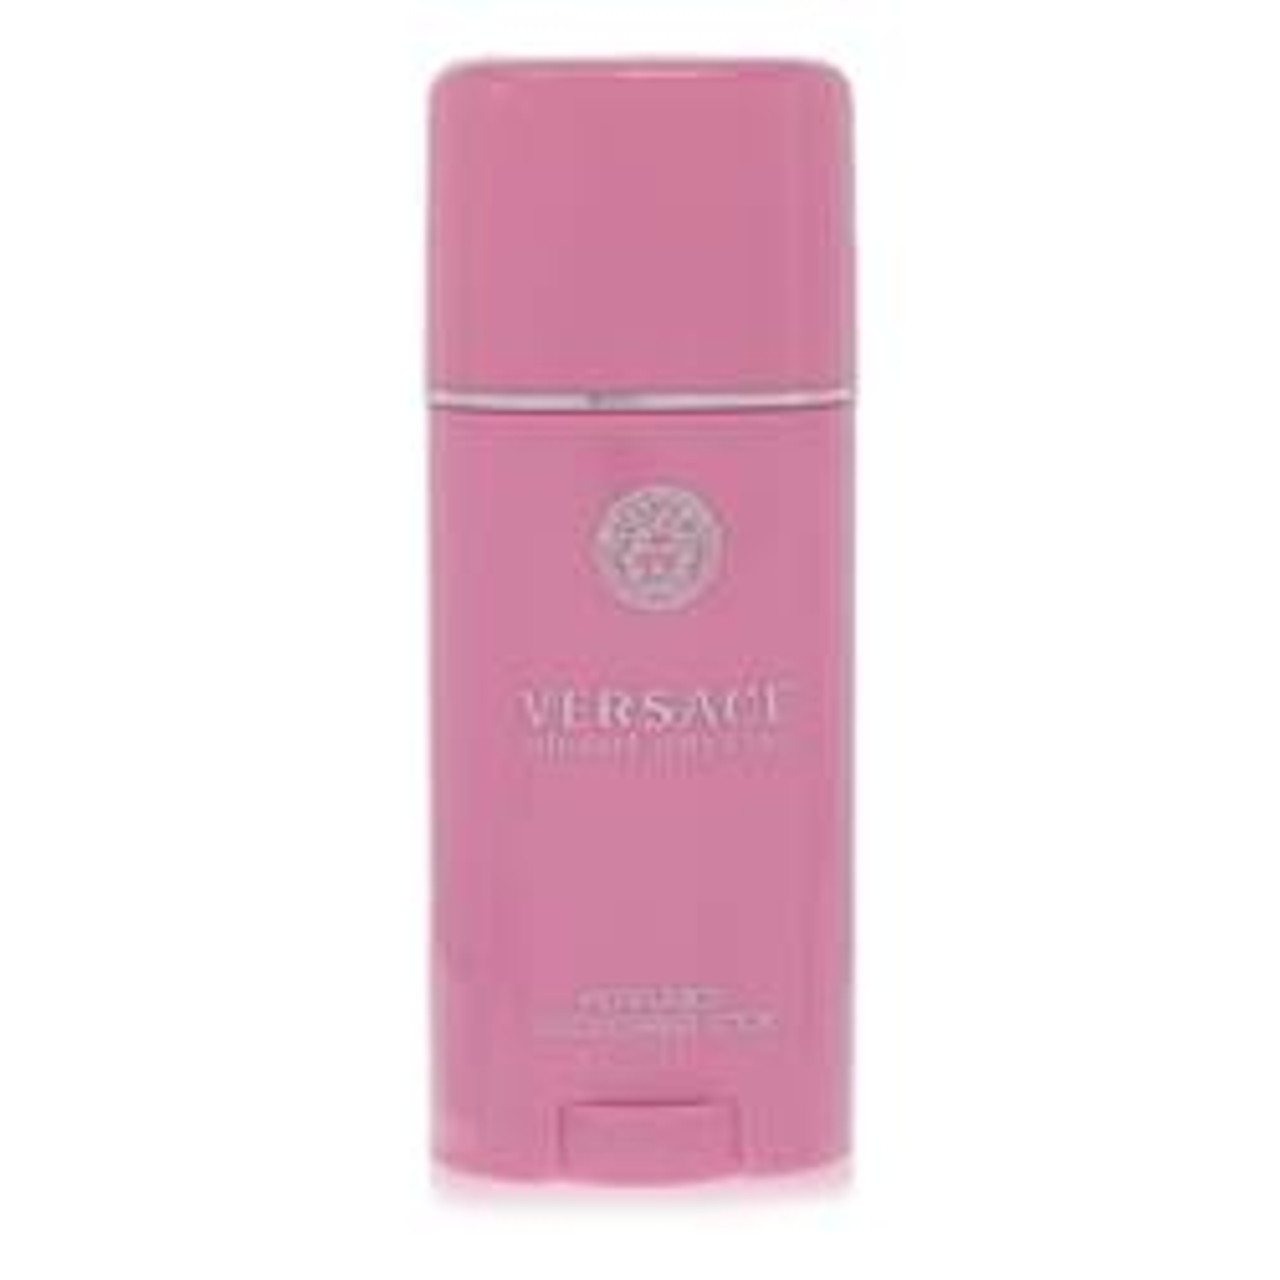 Bright Crystal Perfume By Versace Deodorant Stick 1.7 oz for Women - [From 100.00 - Choose pk Qty ] - *Ships from Miami